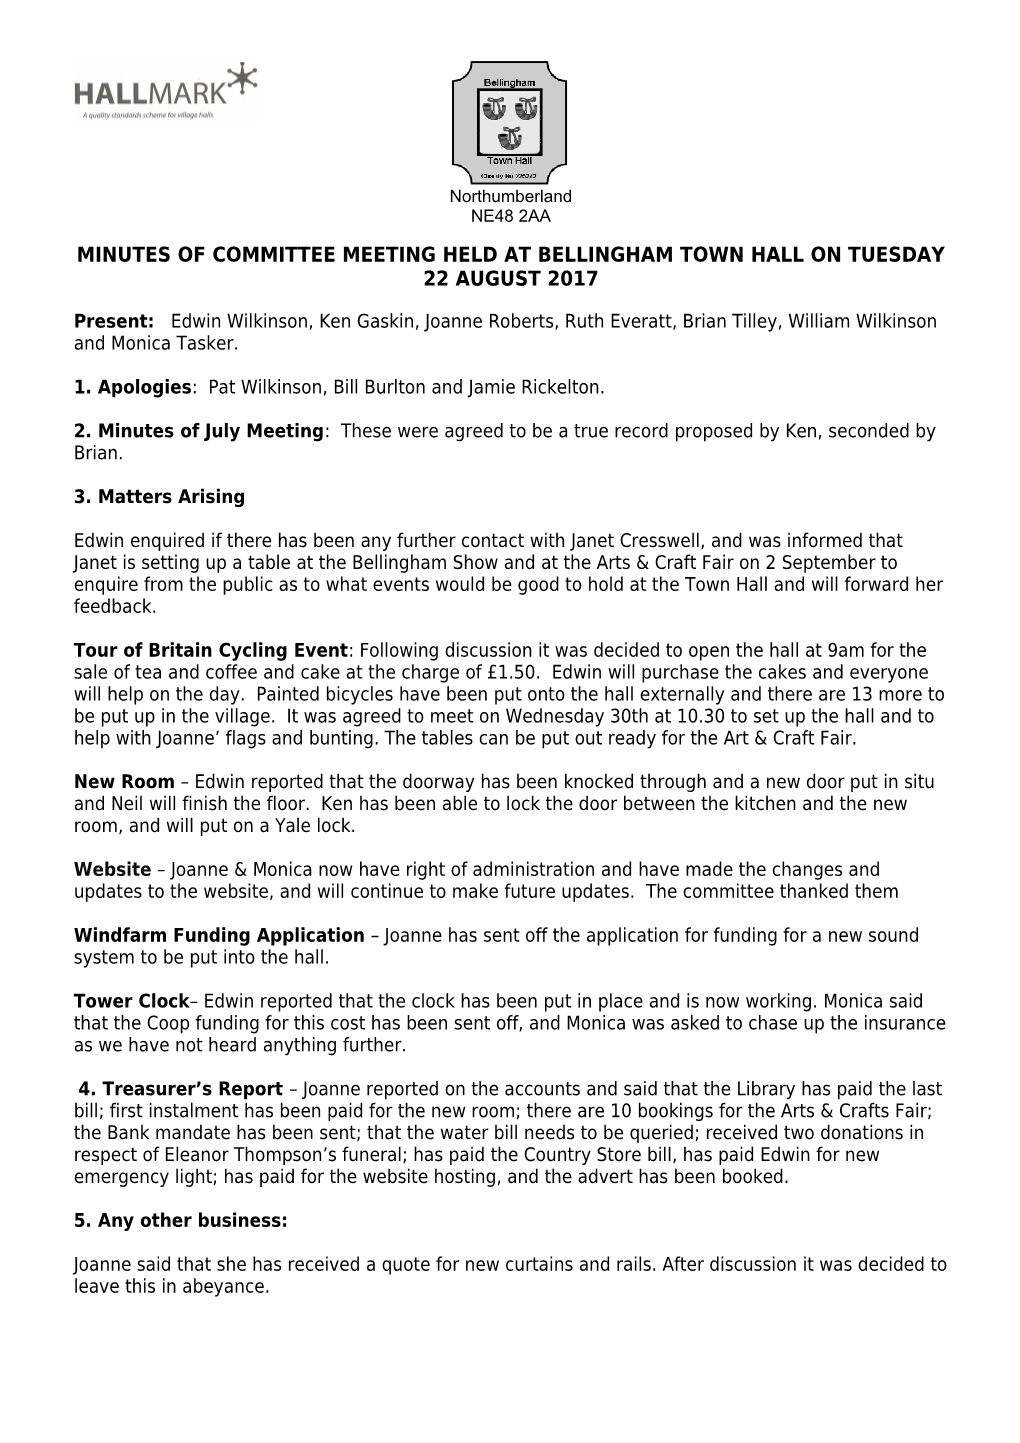 Minutes of Committee Meeting Held at Bellingham Town Hall on Tuesday 22 August 2017